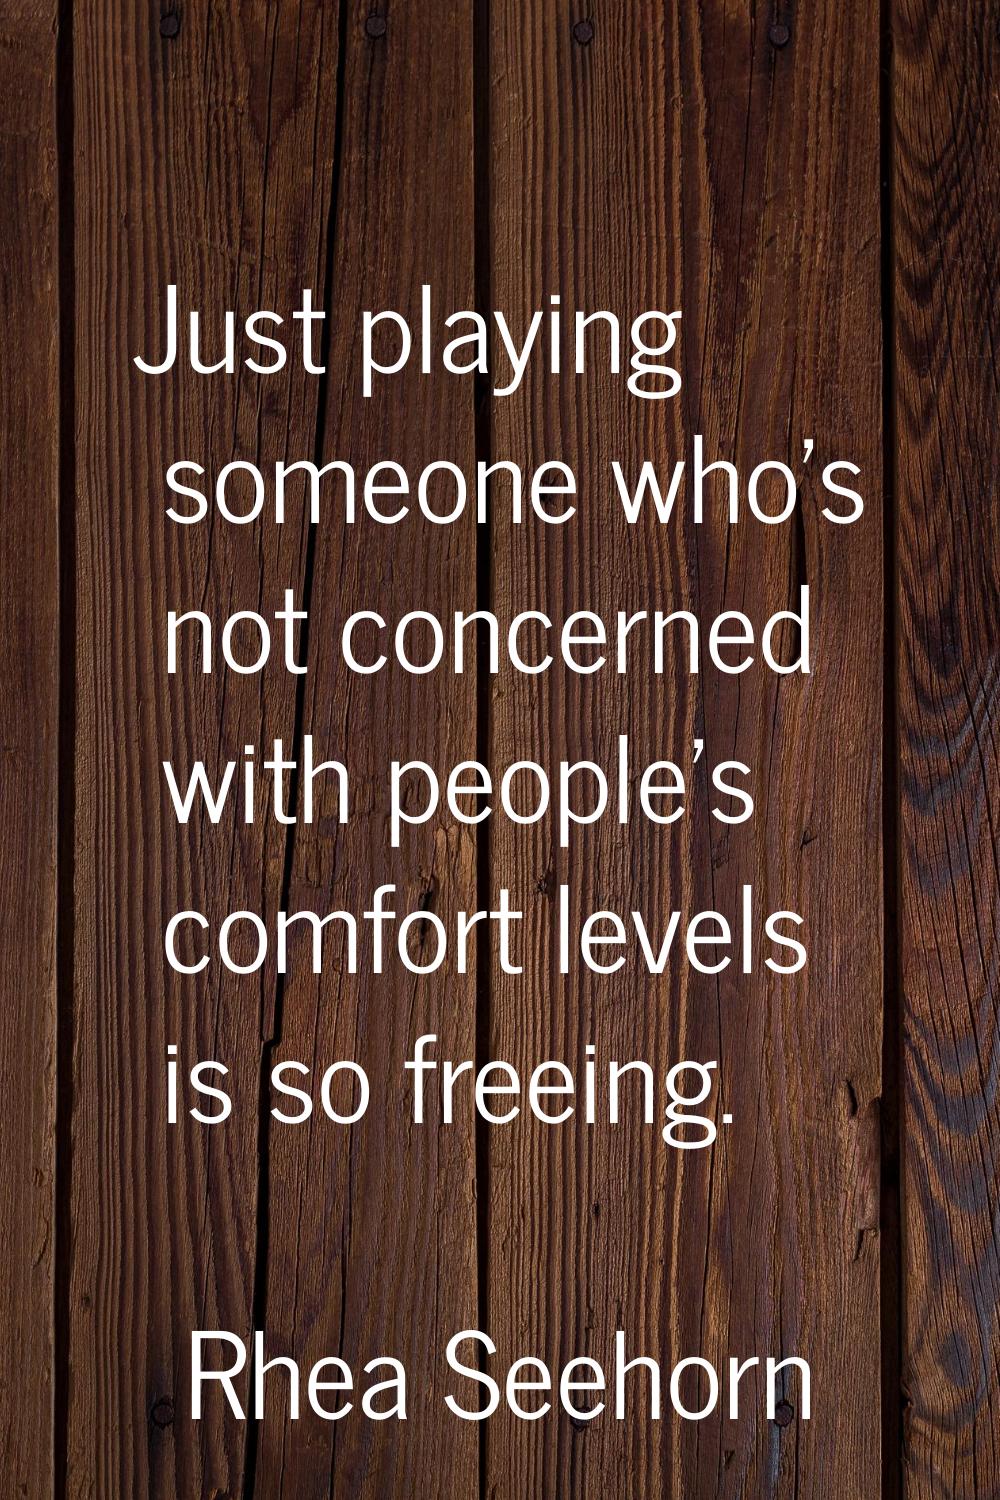 Just playing someone who's not concerned with people's comfort levels is so freeing.